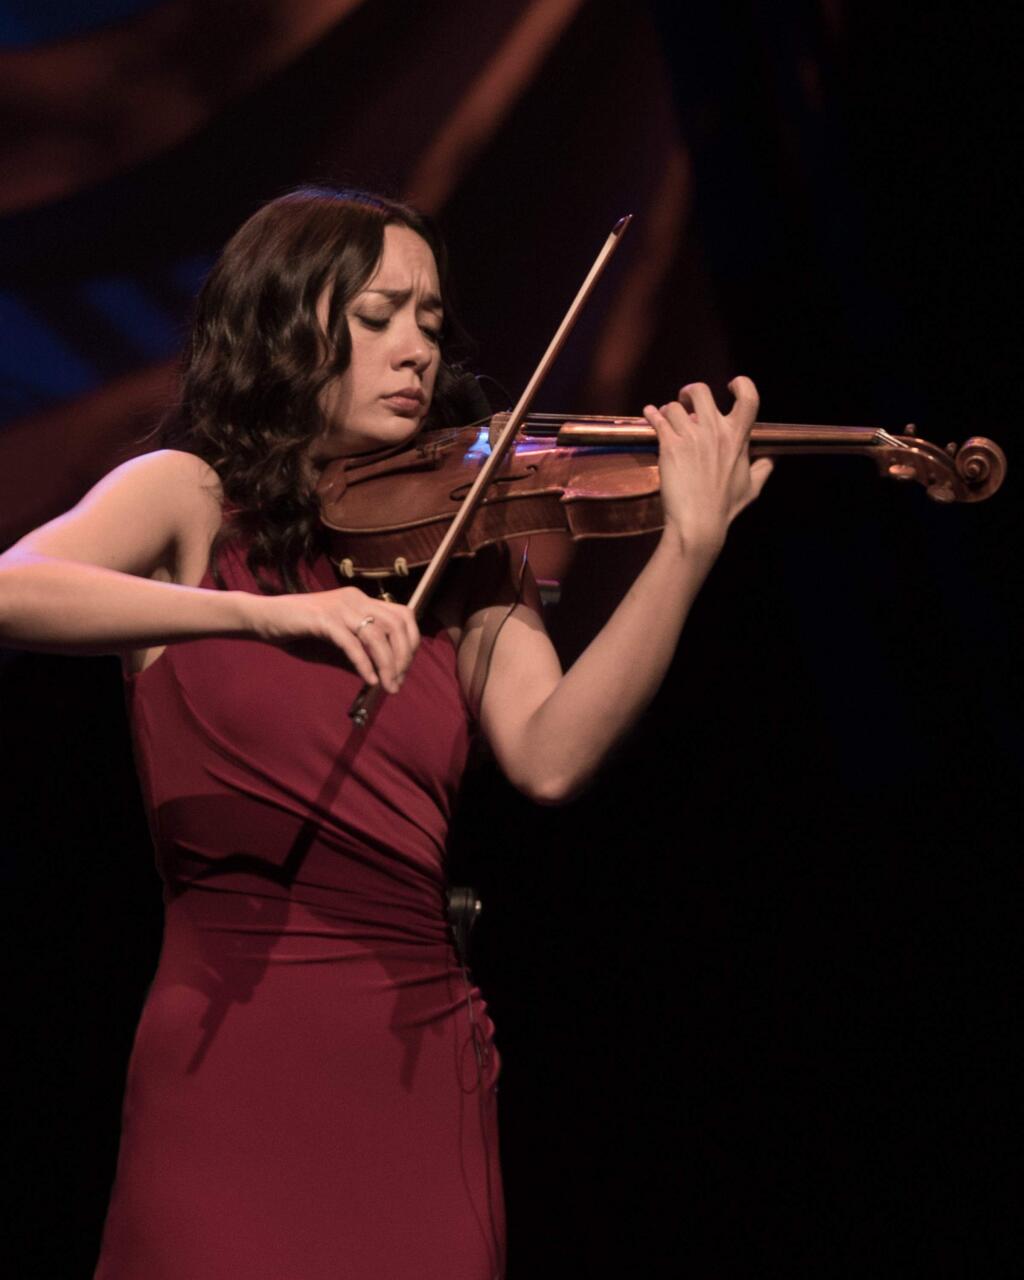 Violinist Lucia Micarelli, star of HBO's 'Treme,' will play atthe Mendocino Music Fest on July 9. “I don't tell my whole life story, but the stuff I have programmed has ended up very varied and eclectic,” she said. “I really try to only program stuff that I really love ... so everything has a meaning, and I do tell a lot of stories about how the music came into my life.”